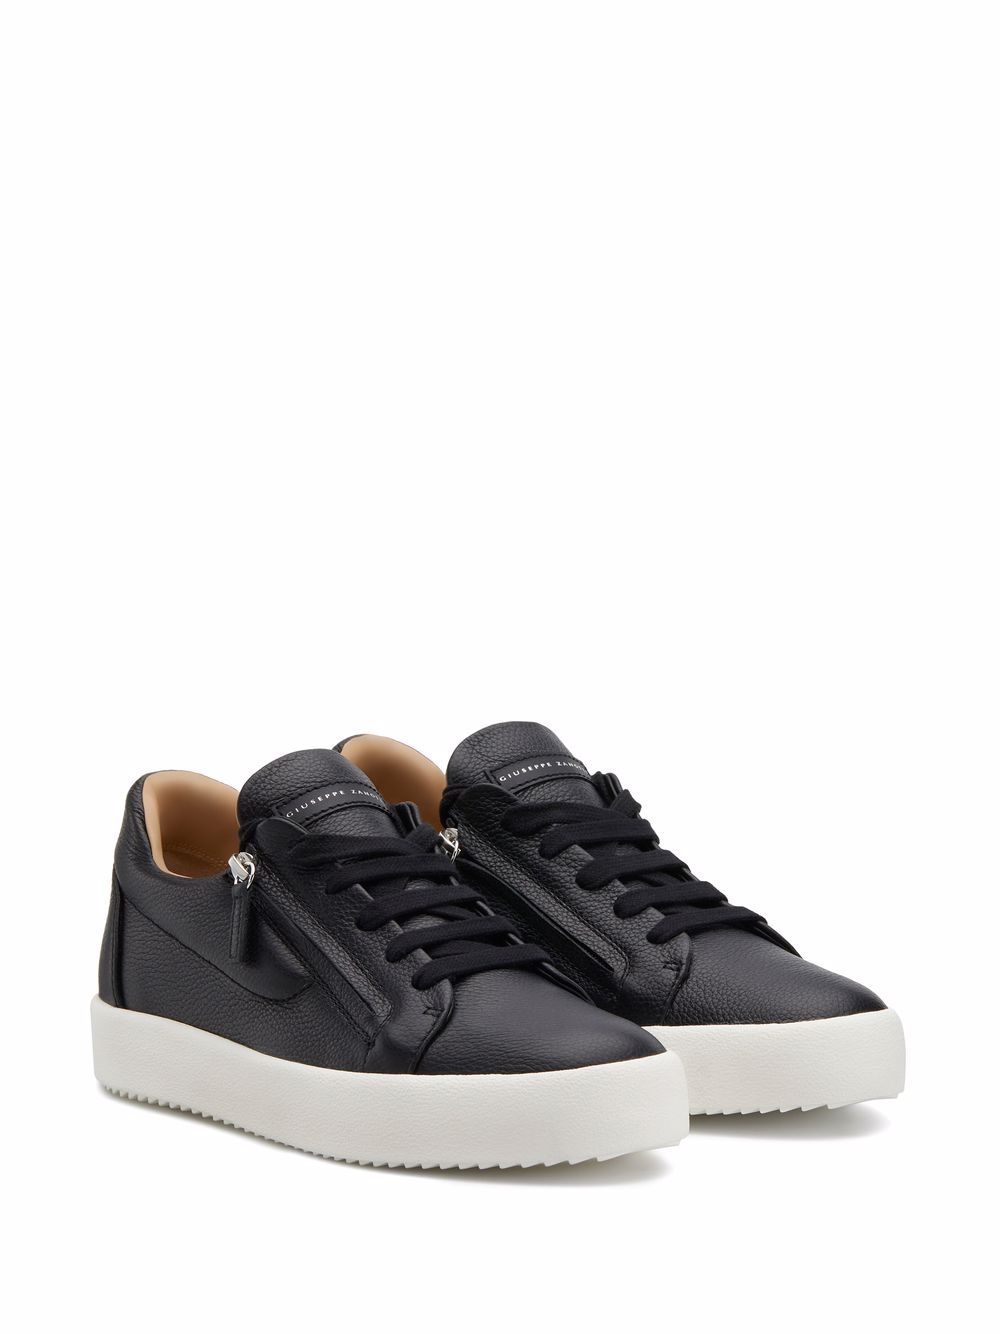 Shop Giuseppe Zanotti Addy leather sneakers with Express Delivery ...